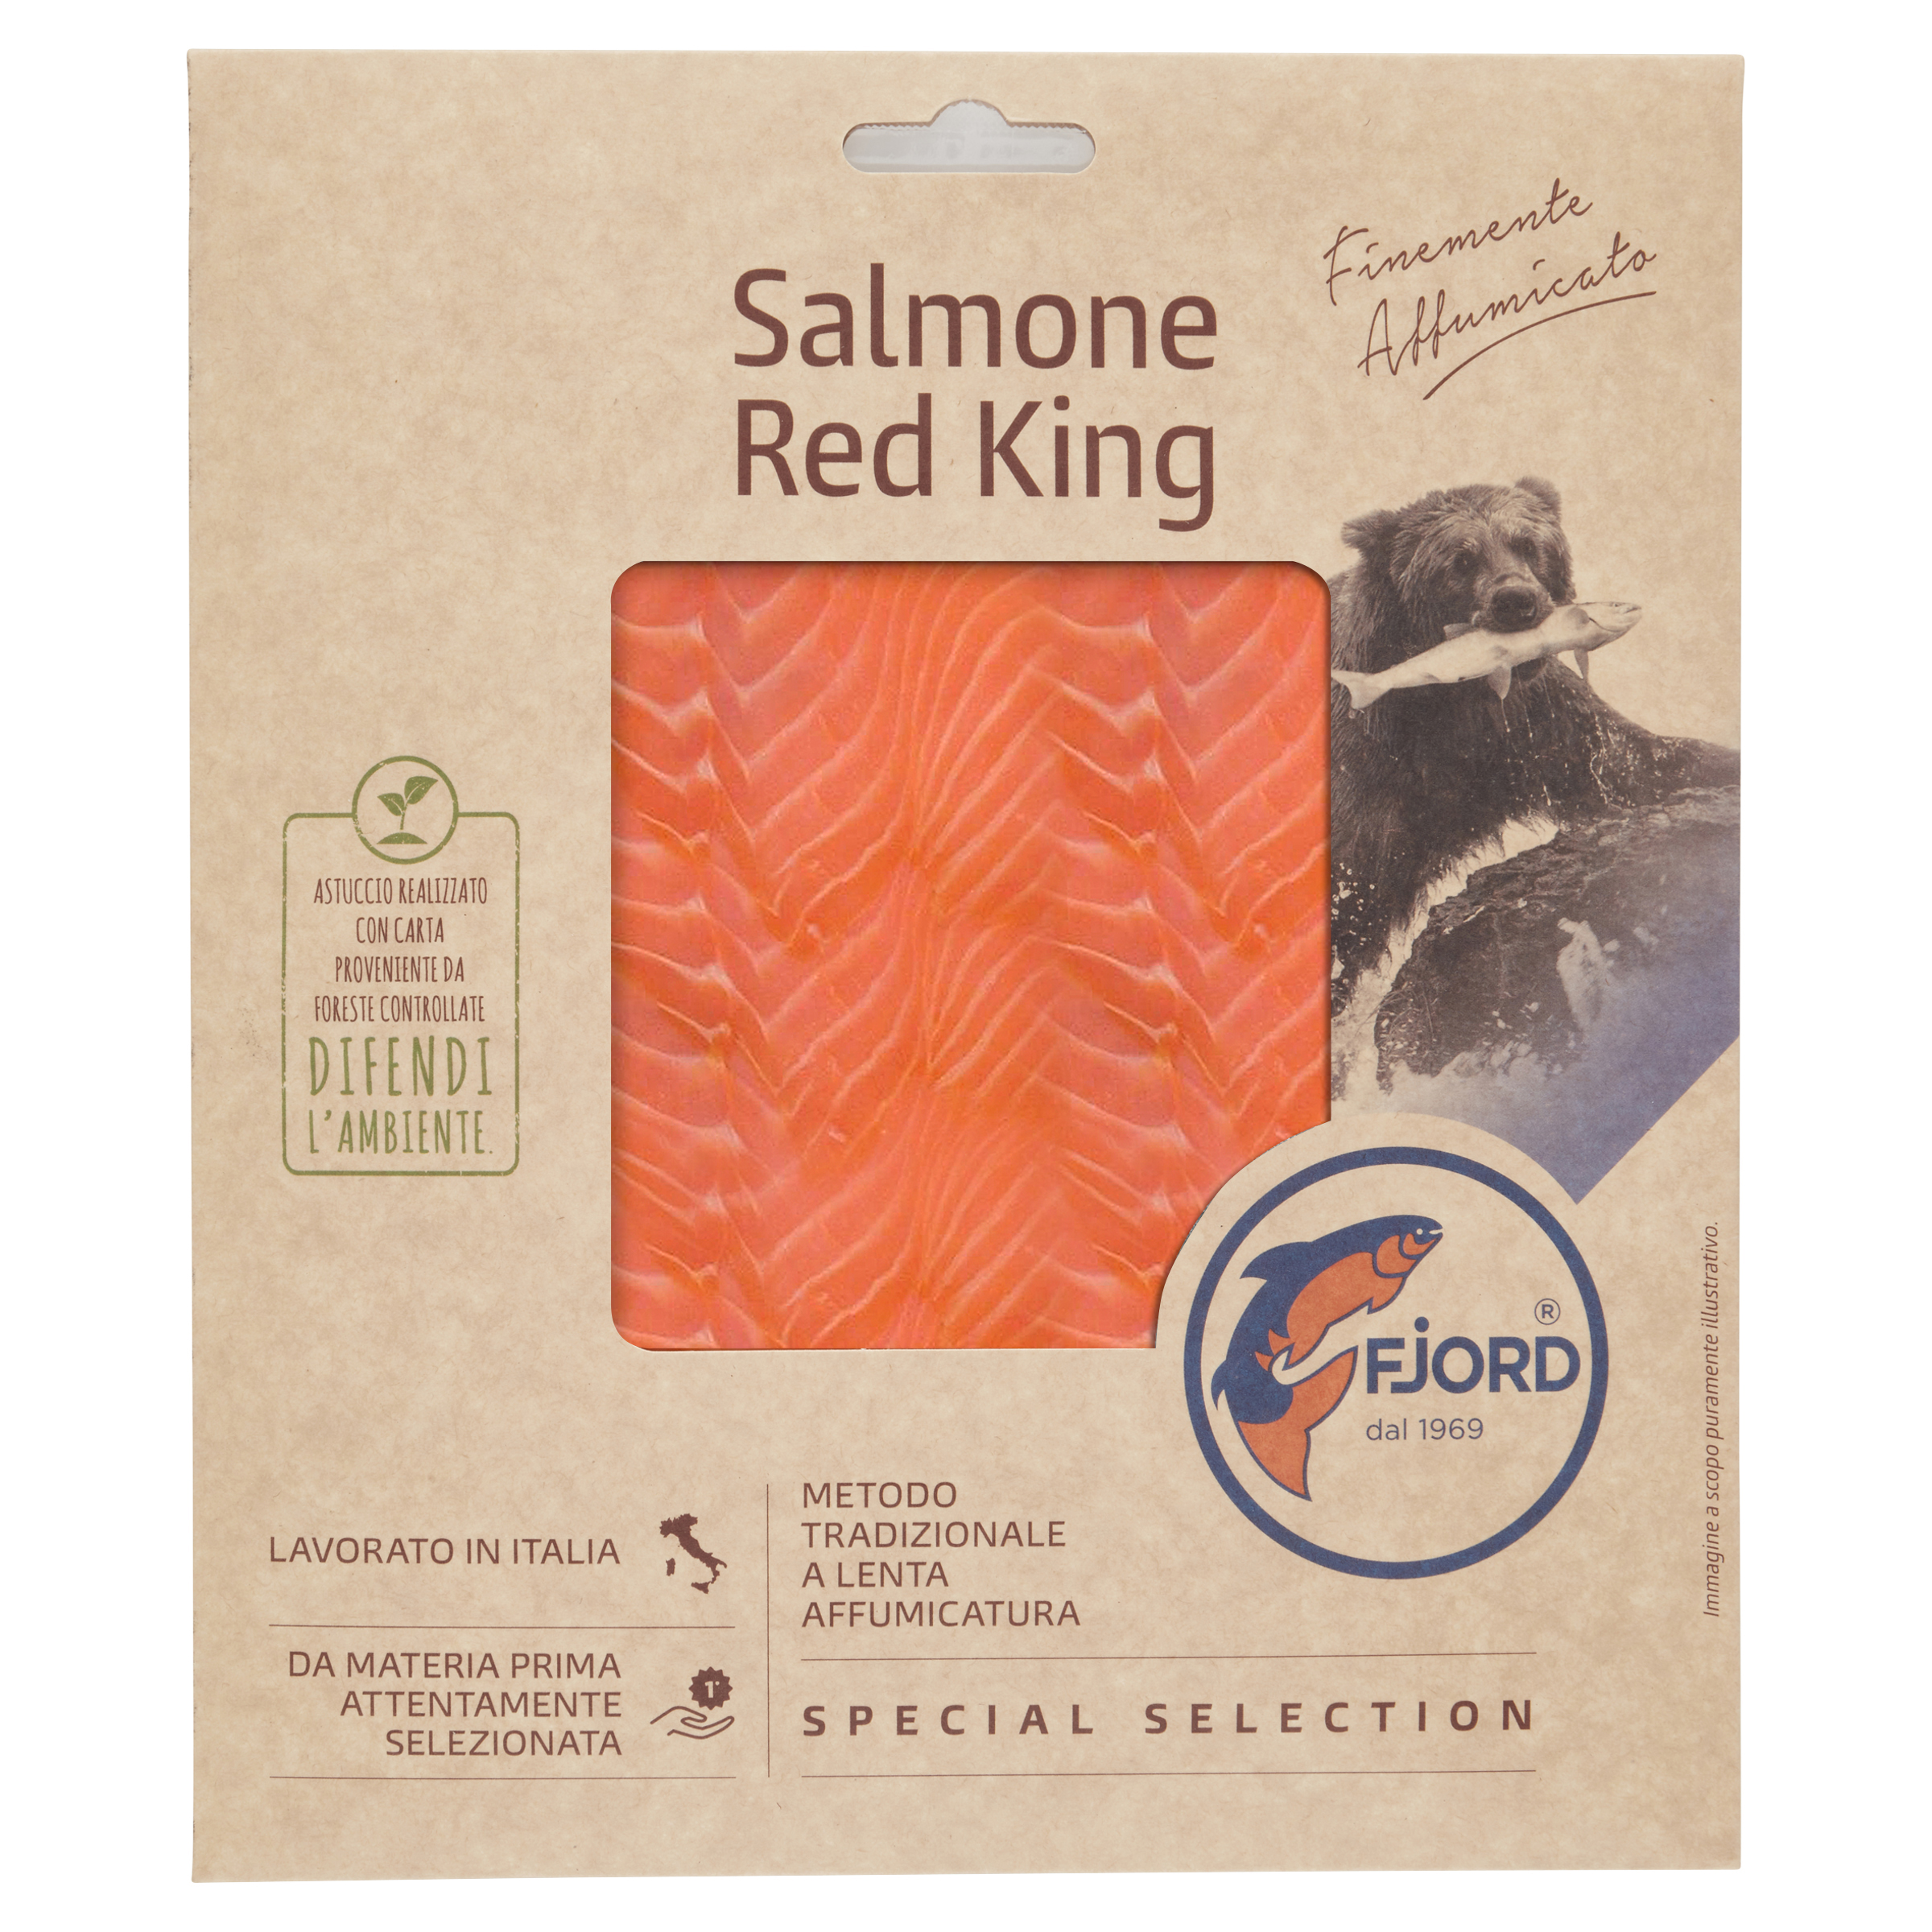 Salmone Red King